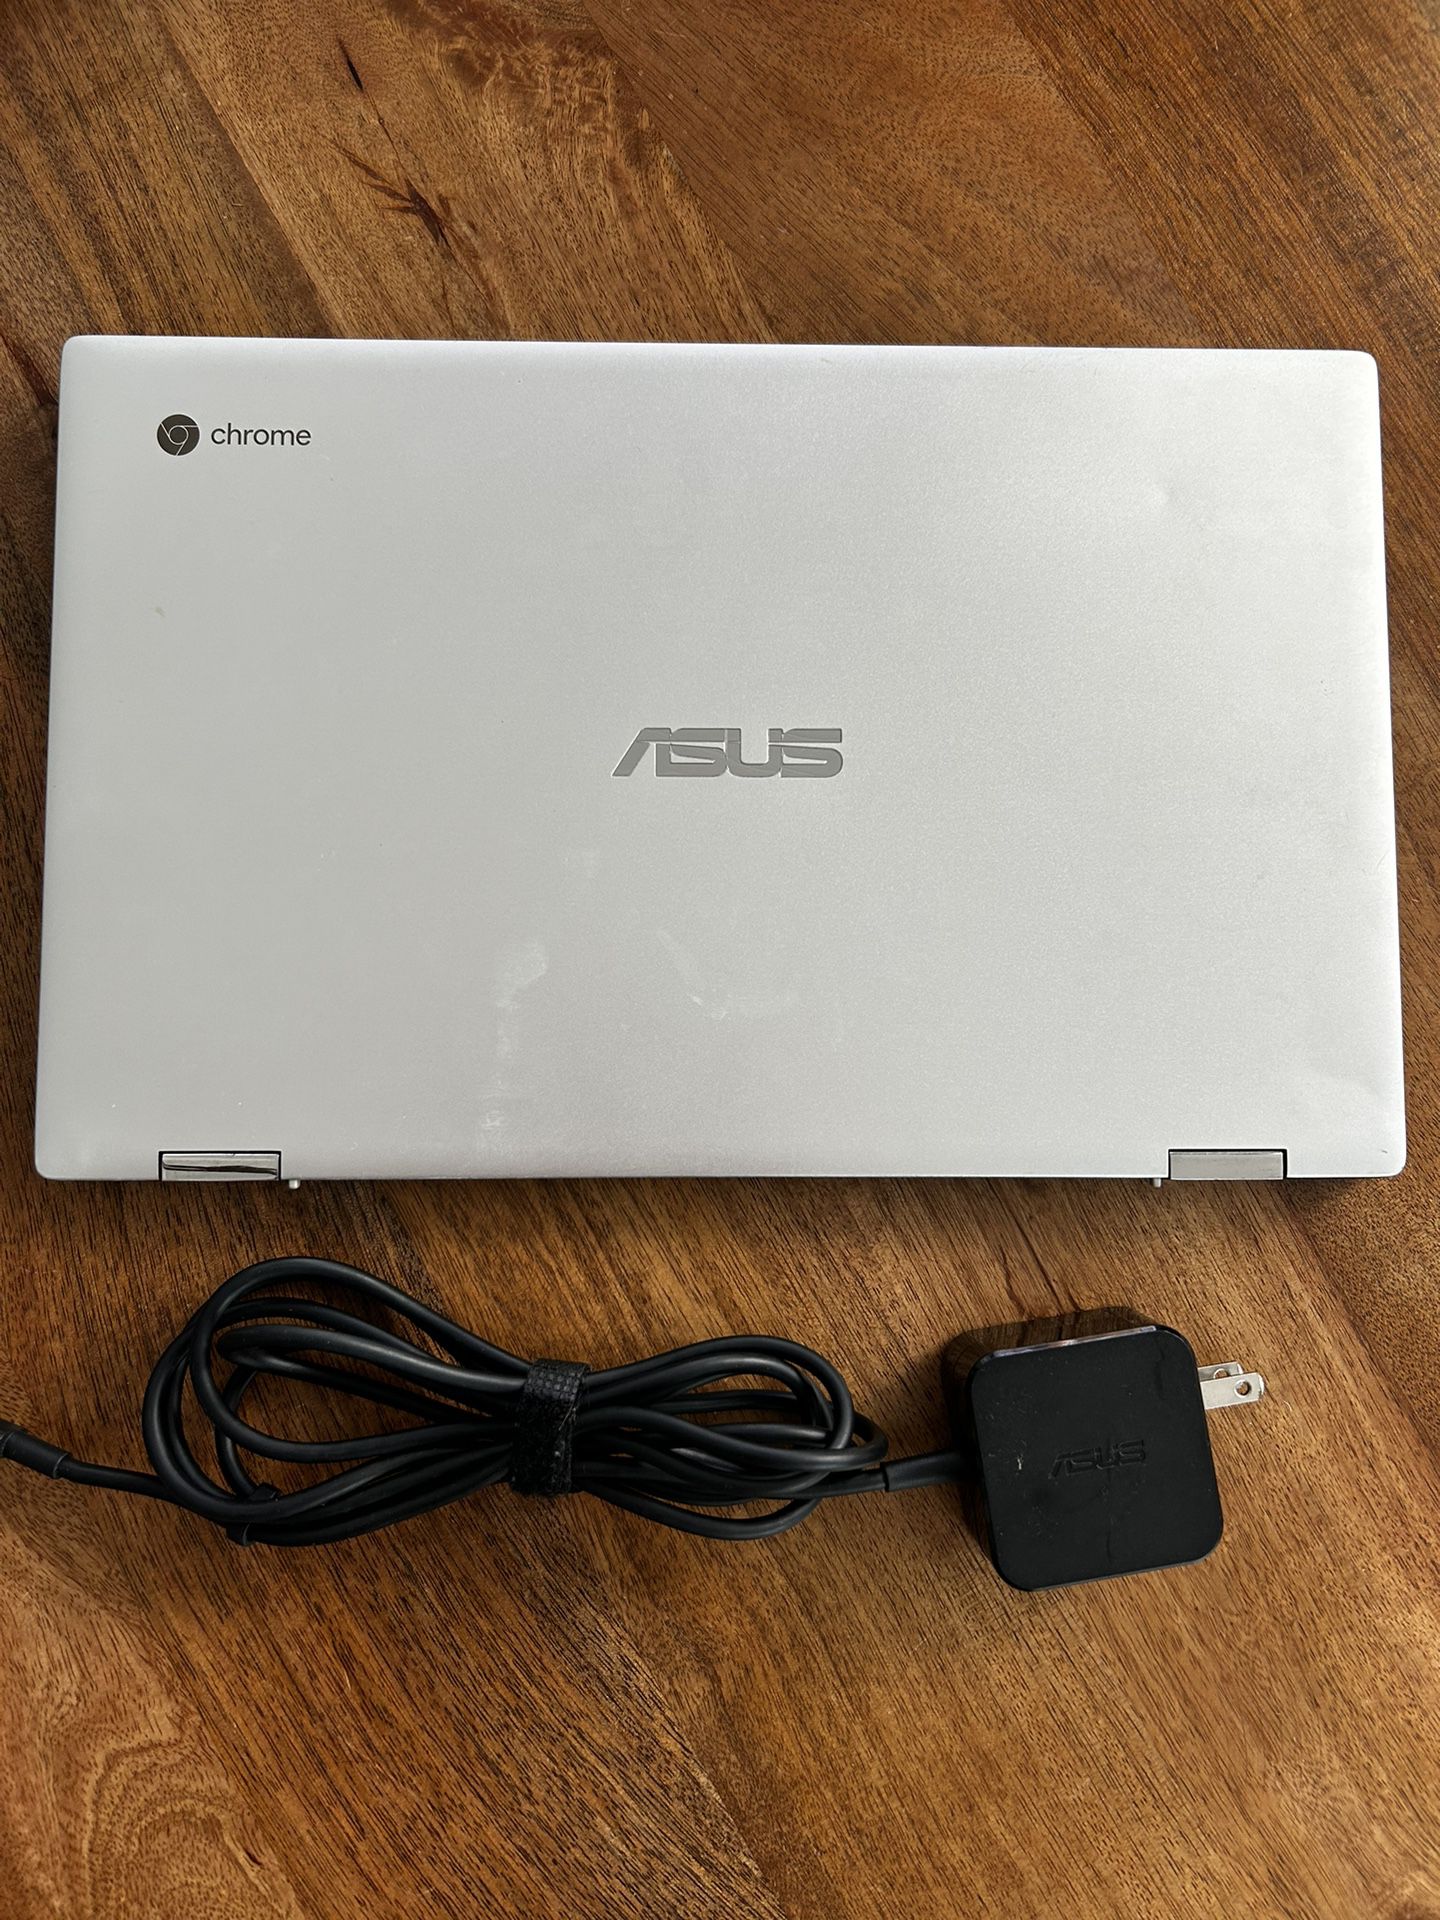 ASUS Notebook PC laptop- lightly used